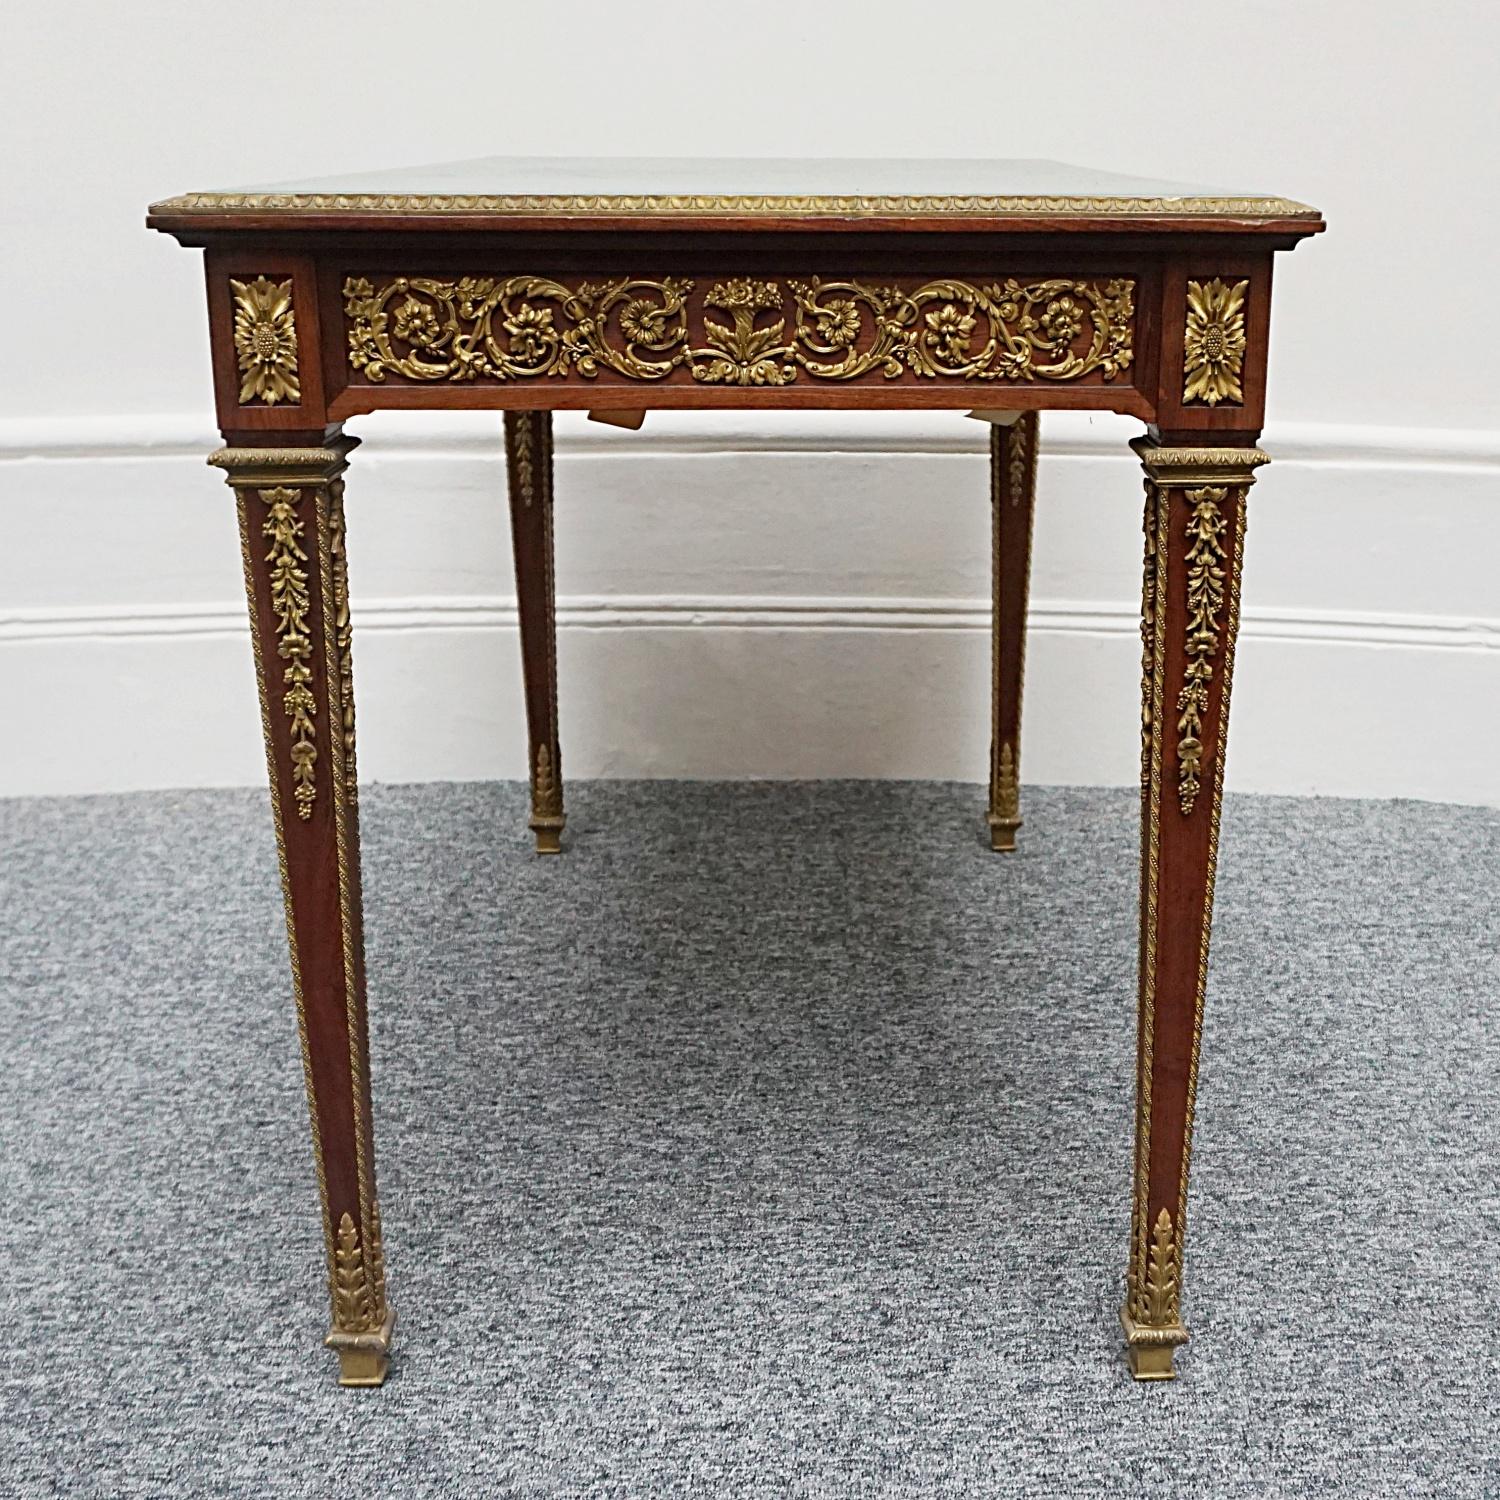 Louis XVI Style Gilt-Bronze Mounted Kingwood Writing Table by Francois Linke For Sale 13